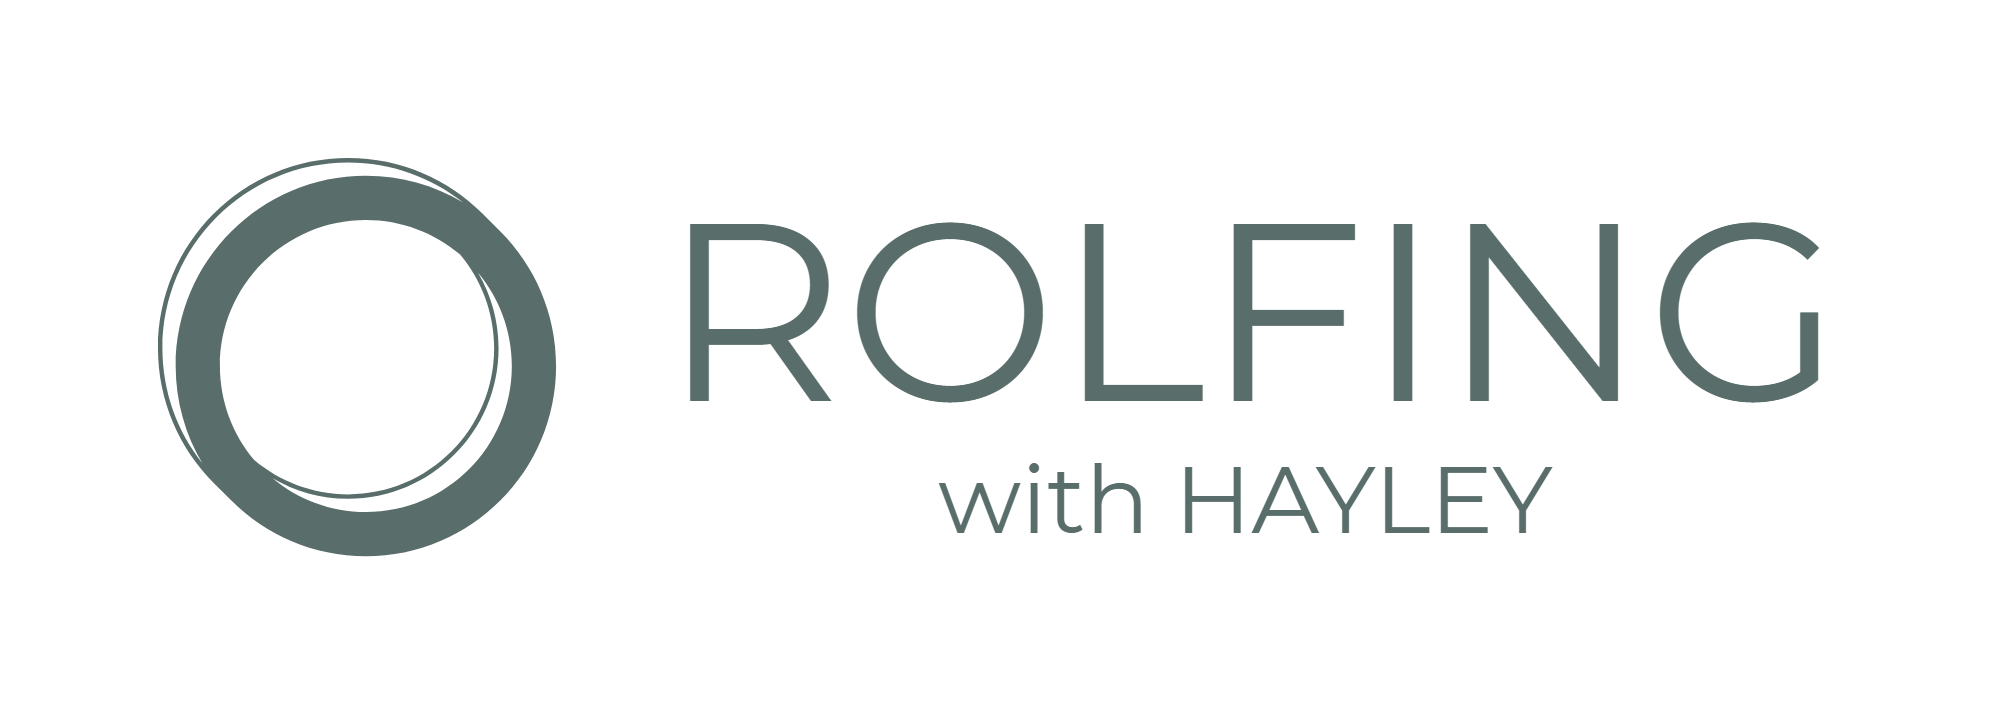 Rolfing with Hayley